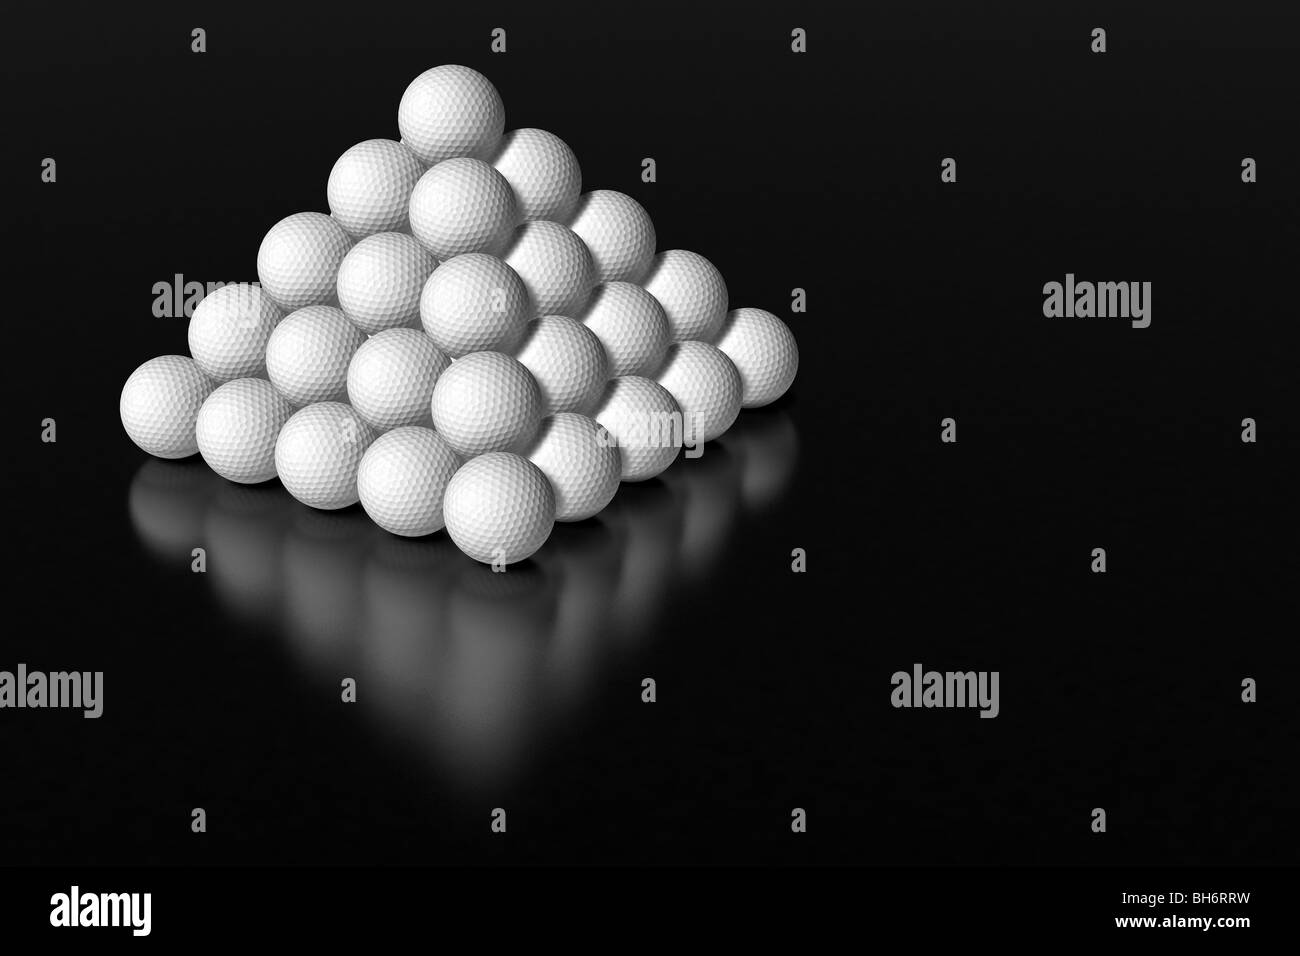 Highly detailed 3D-render of 55 golf balls set up to form a pyramid, mirroring on a brushed metal surface. Stock Photo